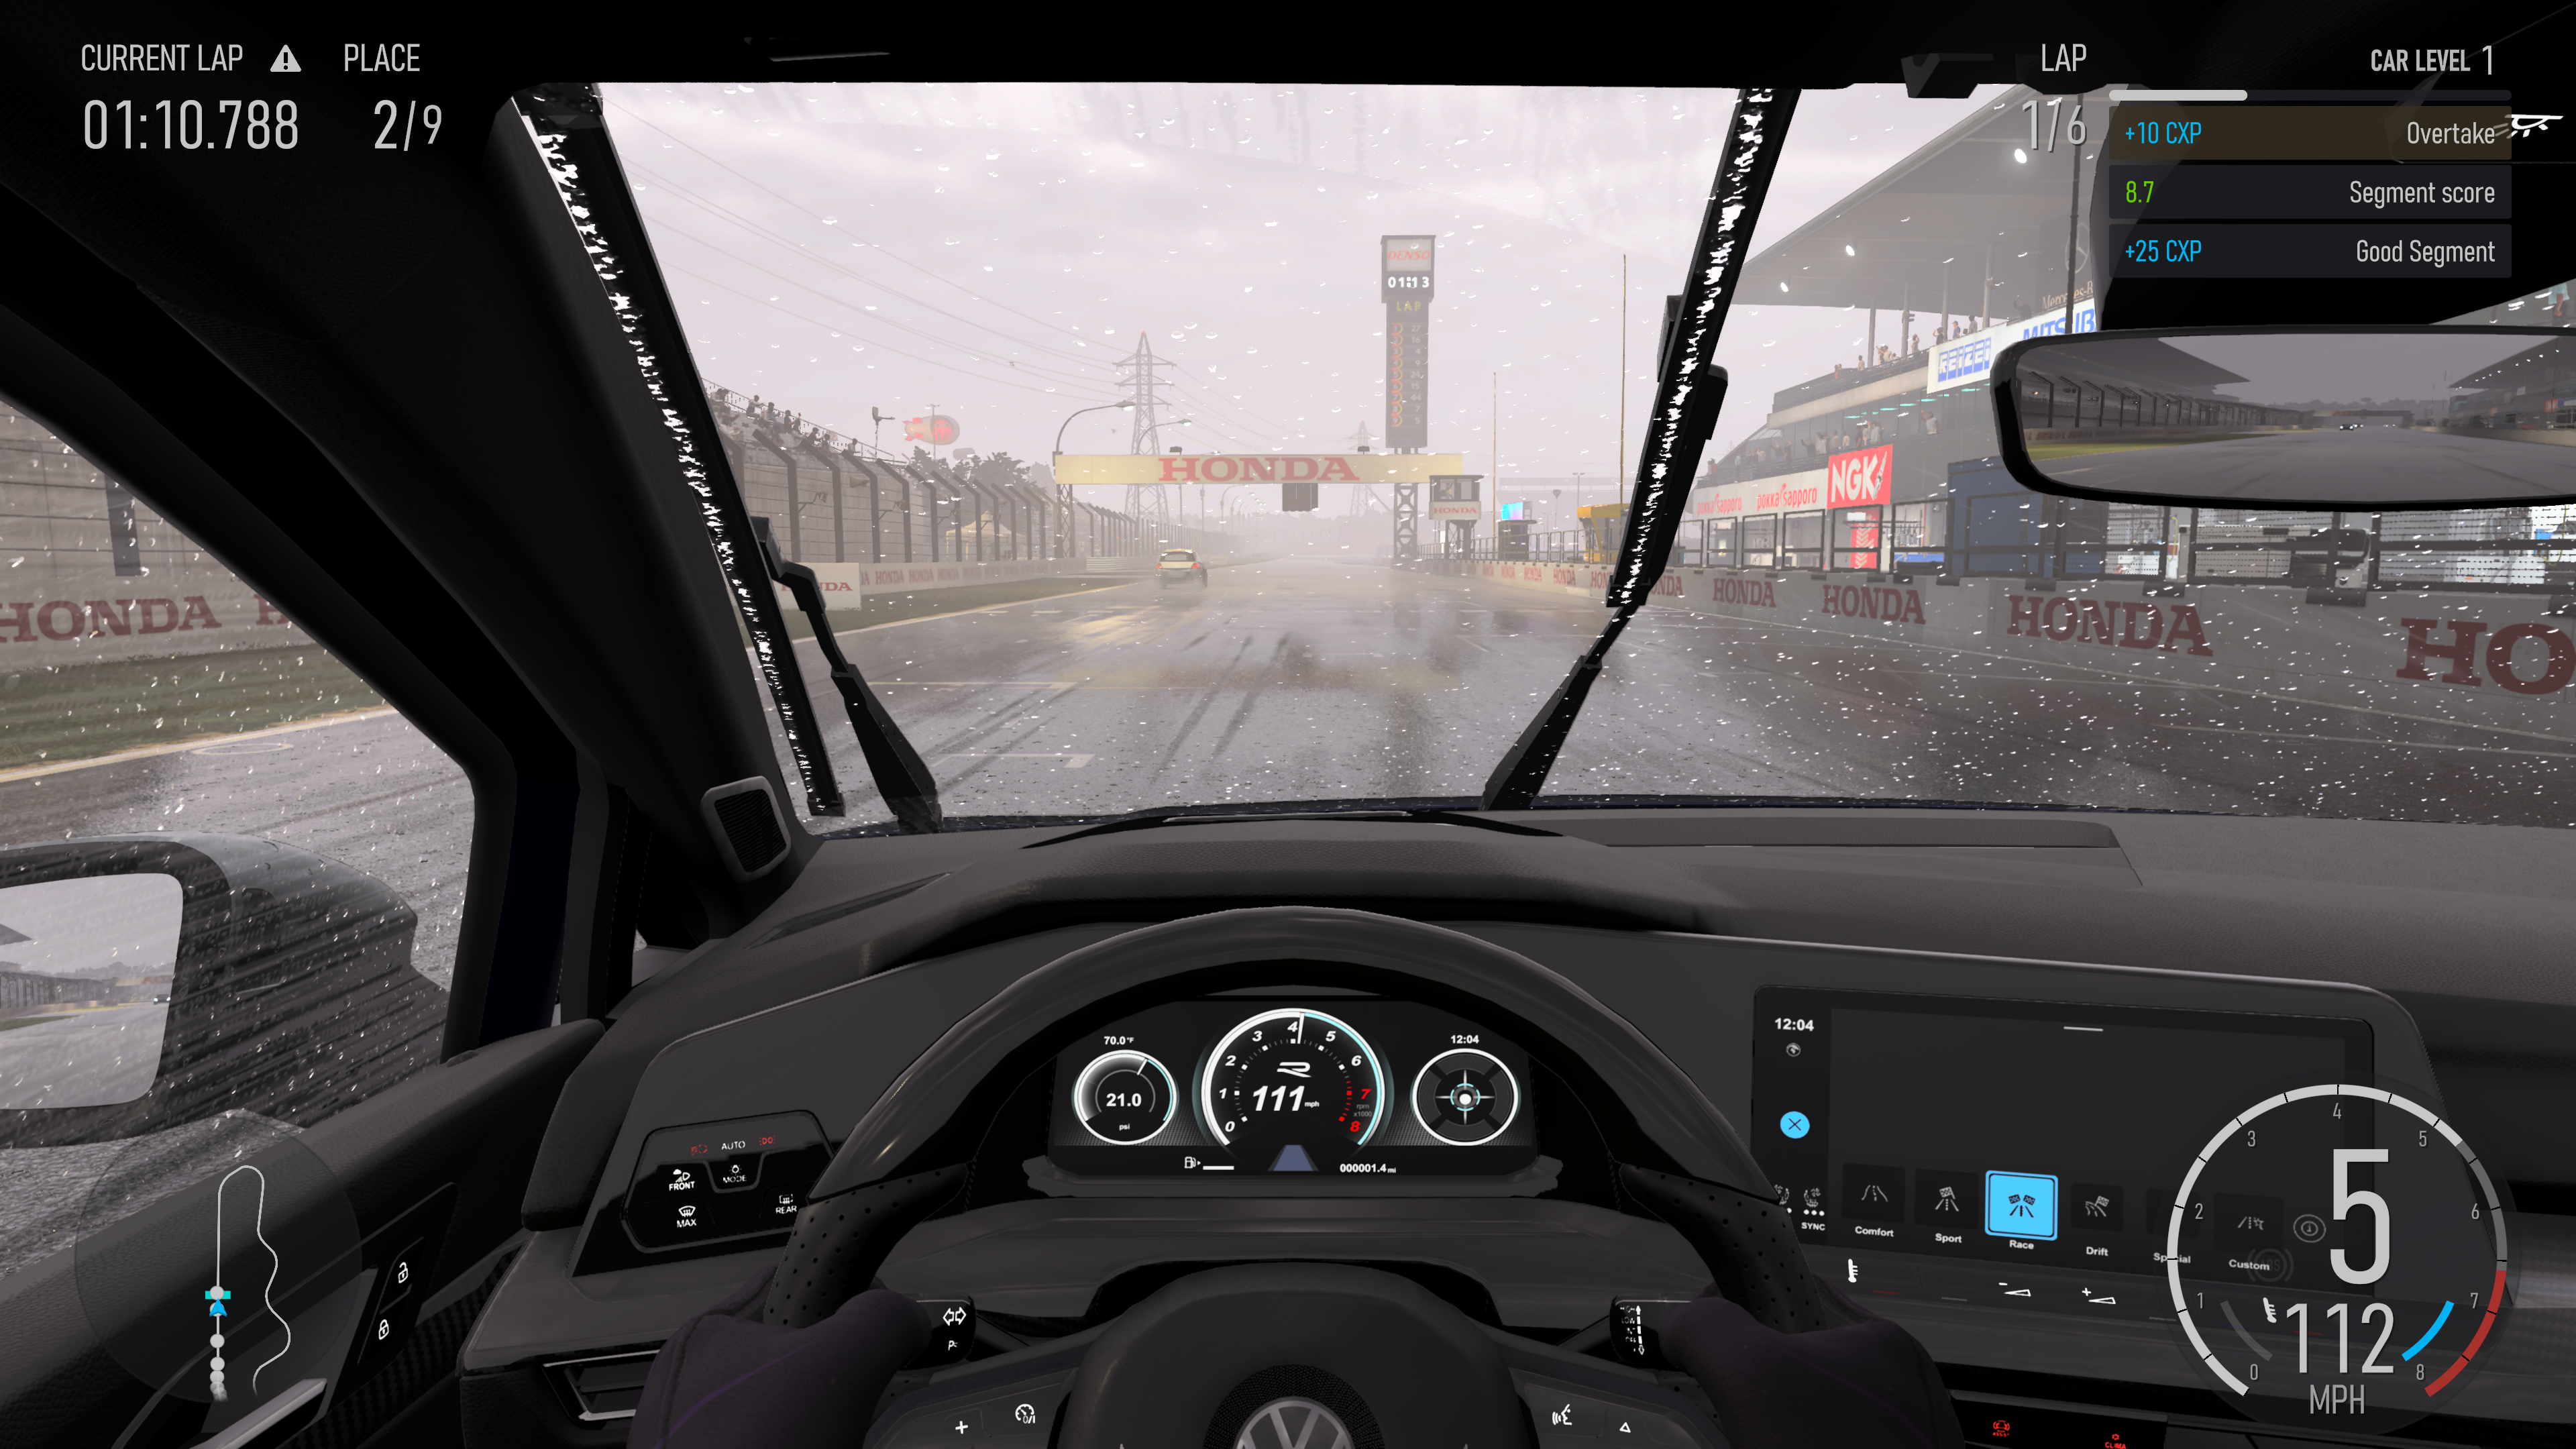 Review: Forza Motorsport 4 – SideQuesting